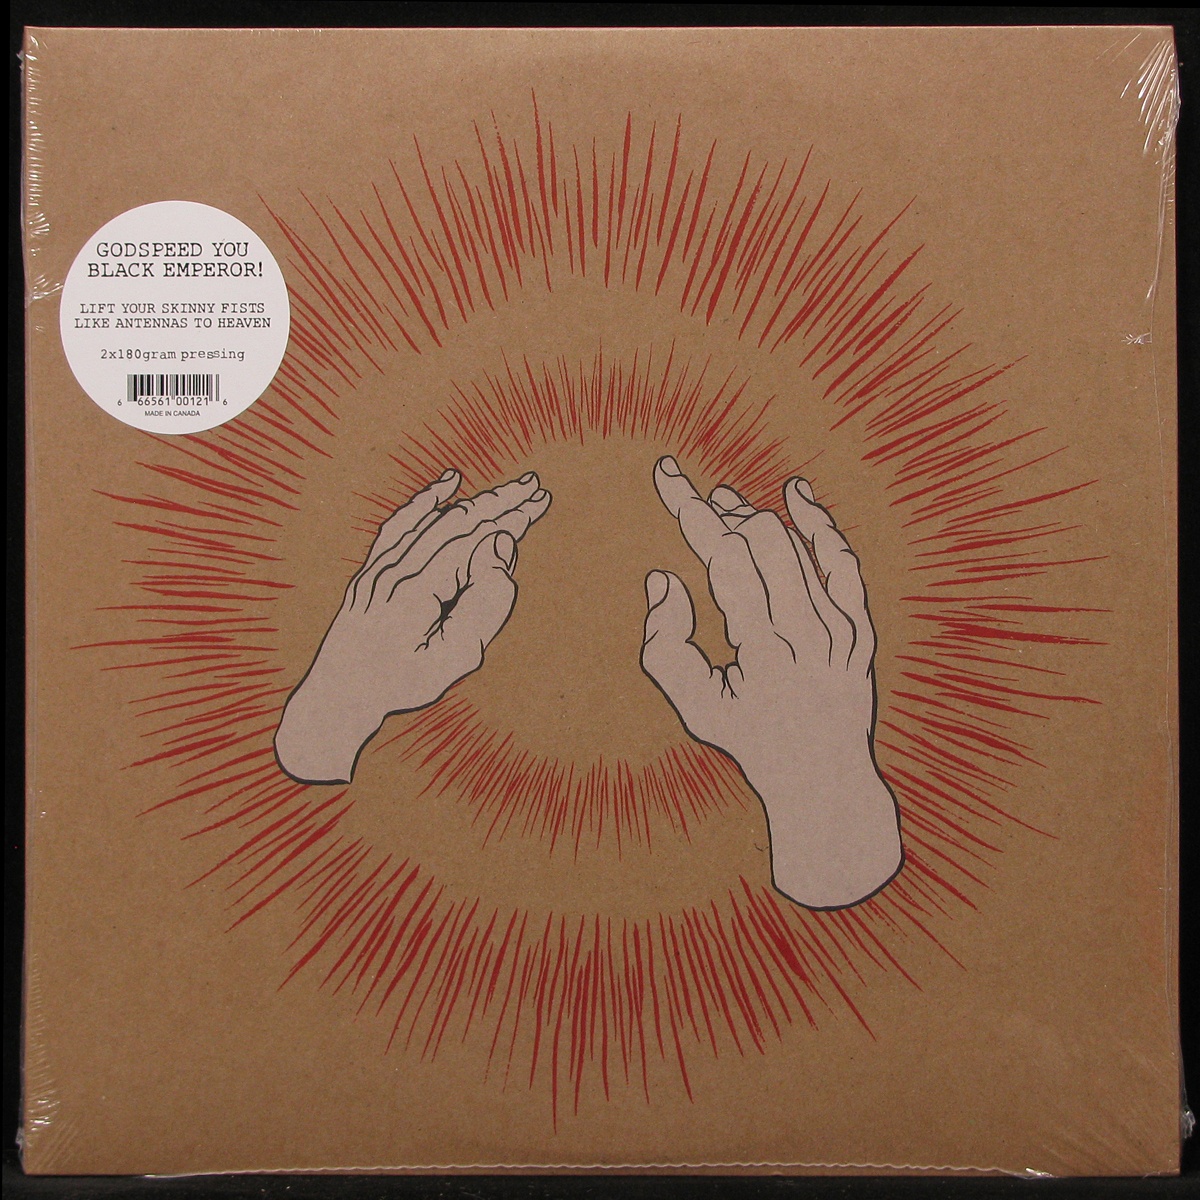 LP Godspeed You Black Emperor! — Lift Your Skinny Fists Like Antennas To Heaven (2LP) фото